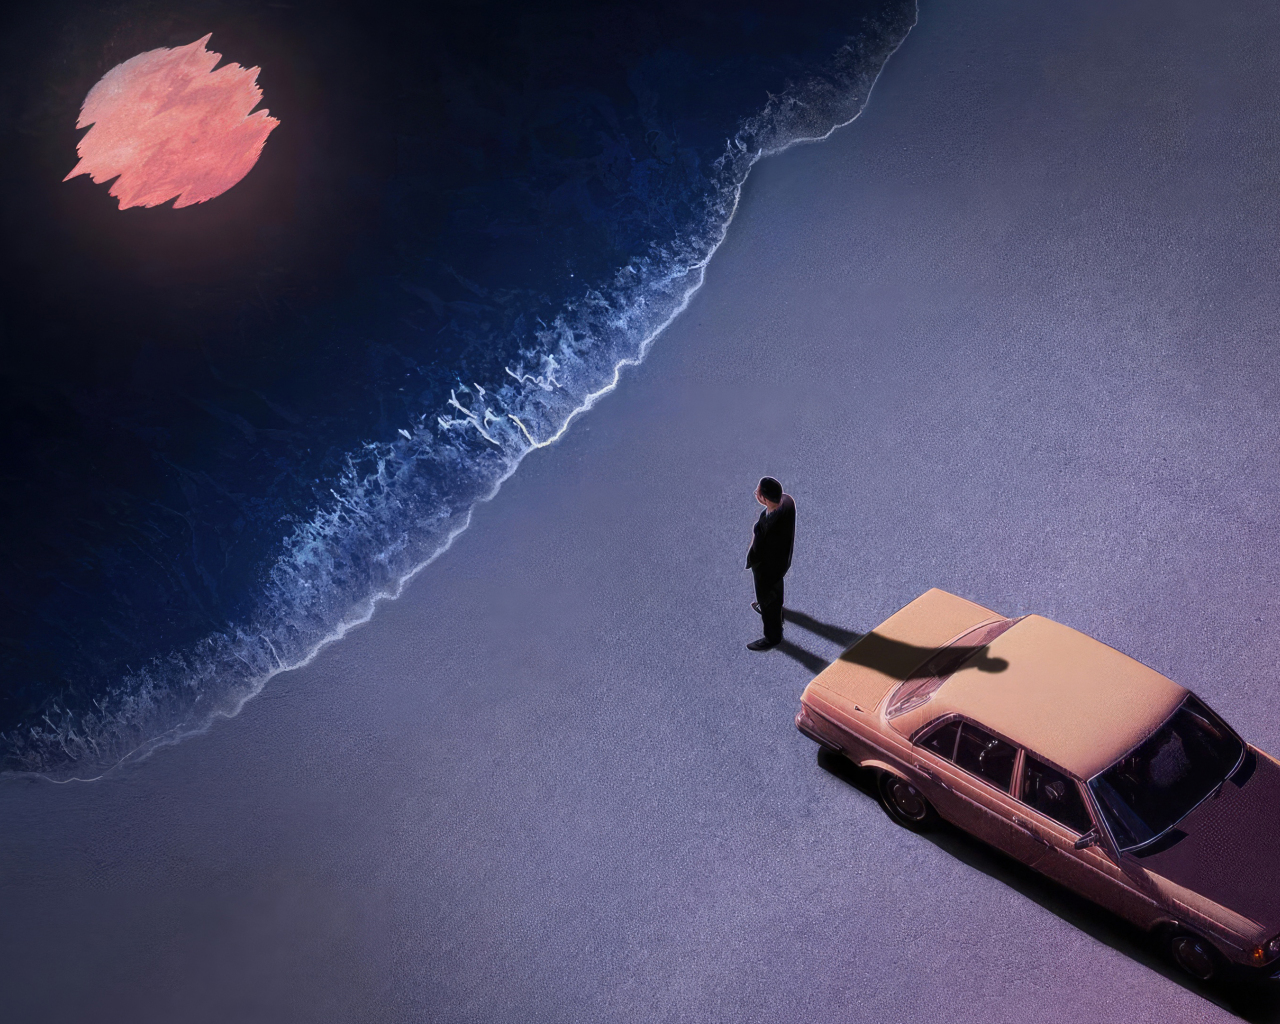 Lonely at night at the beach, car and man, art , 1280x1024 wallpaper